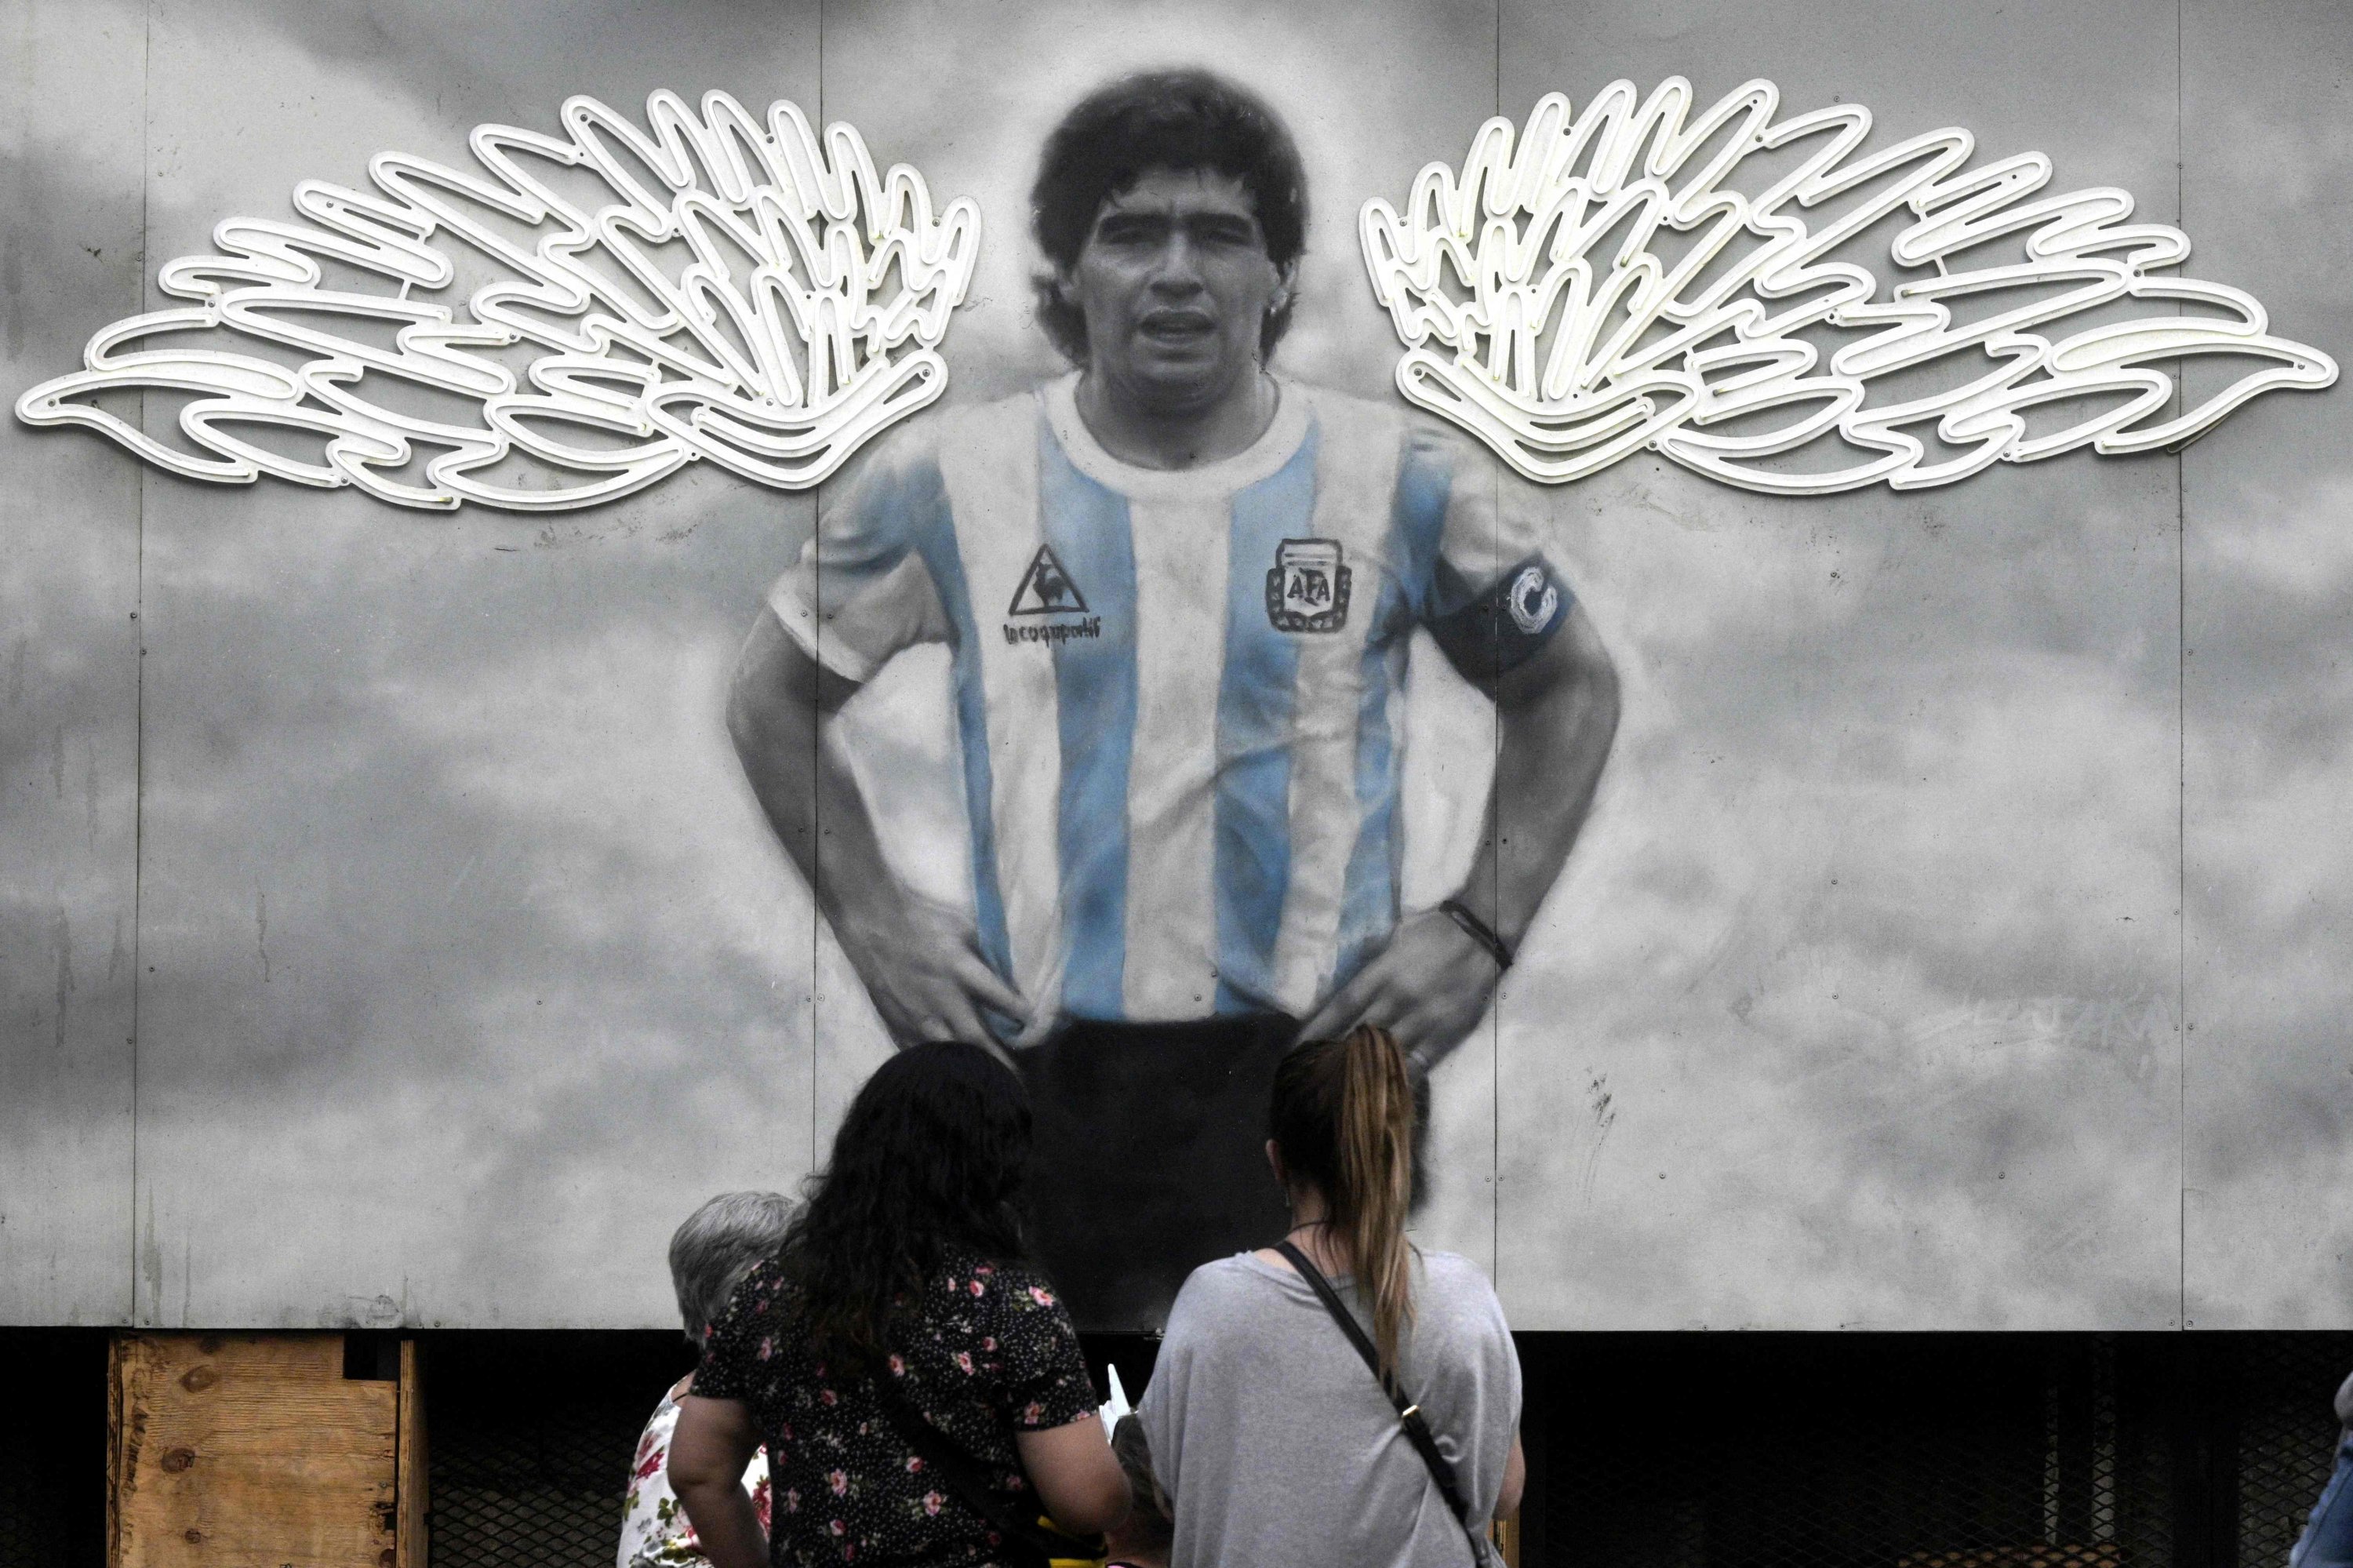 Women look at a mural depicting late Argentine football icon Diego Maradona, by artists Maximiliano Bagnasco and Dreier Salamanca Vargas, outside a restaurant in Buenos Aires, Nov. 4, 2021. (AFP Photo)